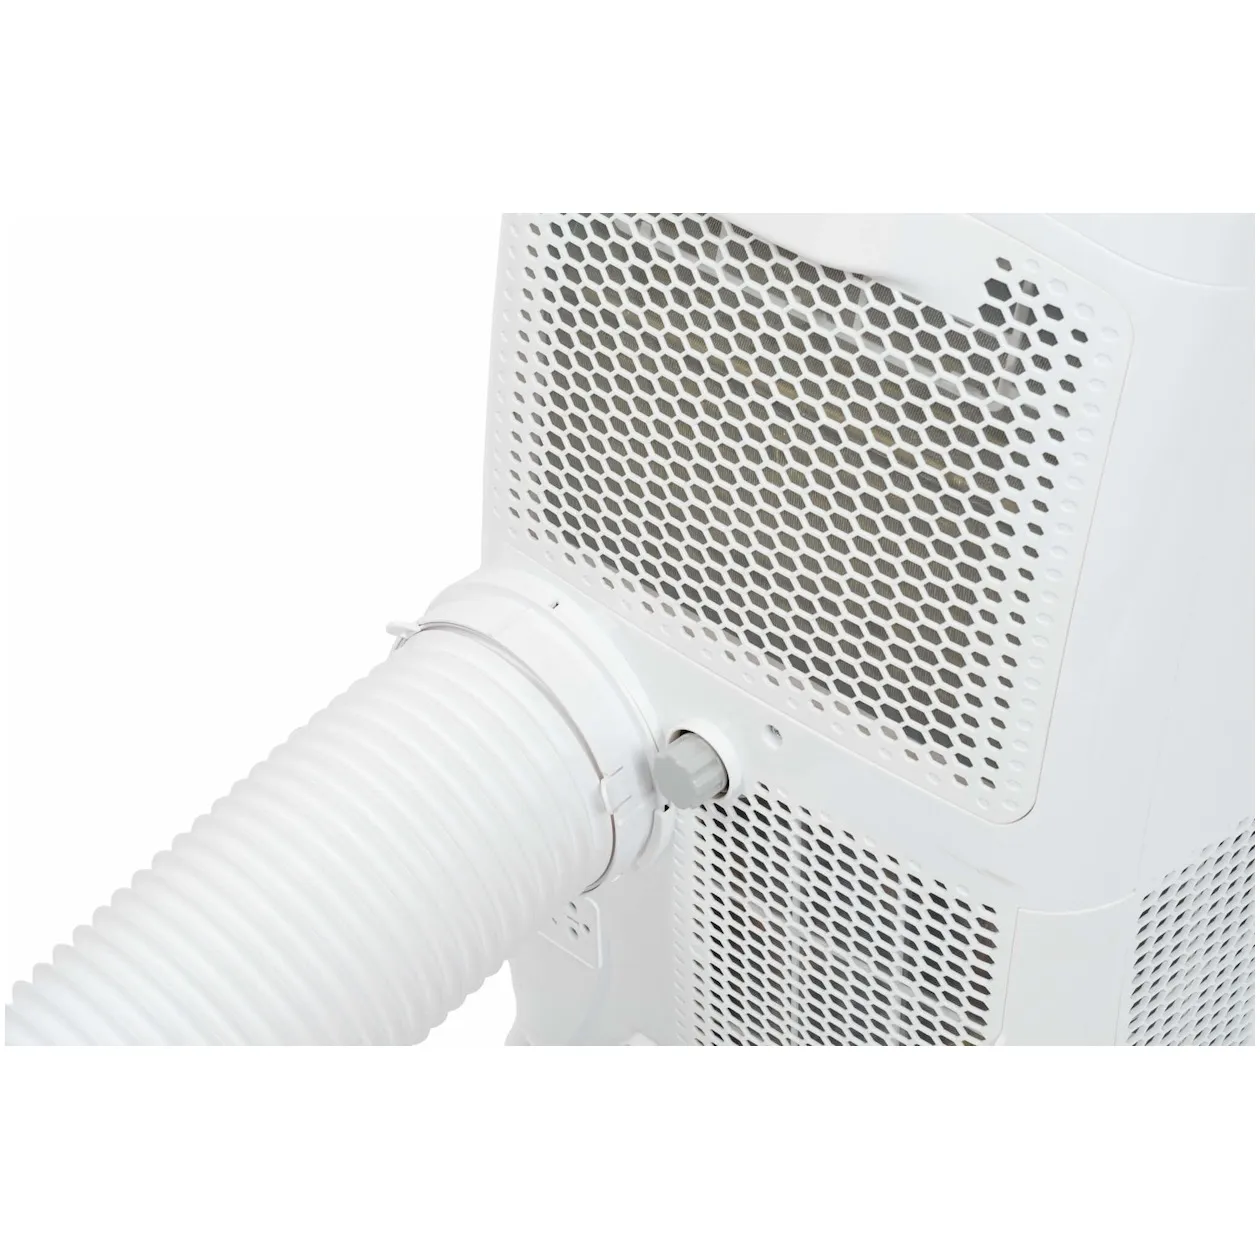 Eurom Coolsmart 90 Airconditioner